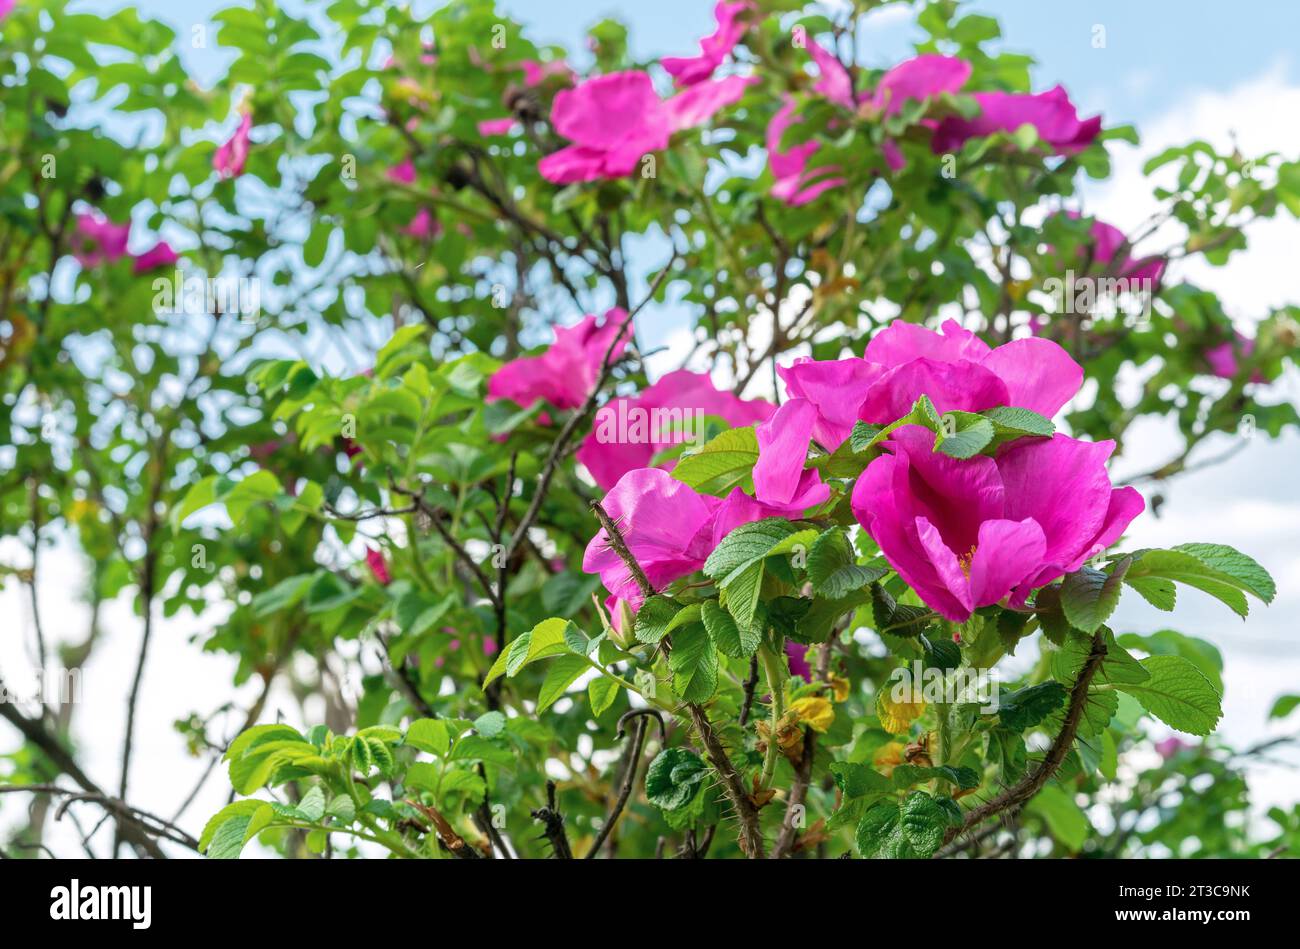 Purple flowers rose hips or briar, wild rose, dog rose in the autumn garden. Stock Photo